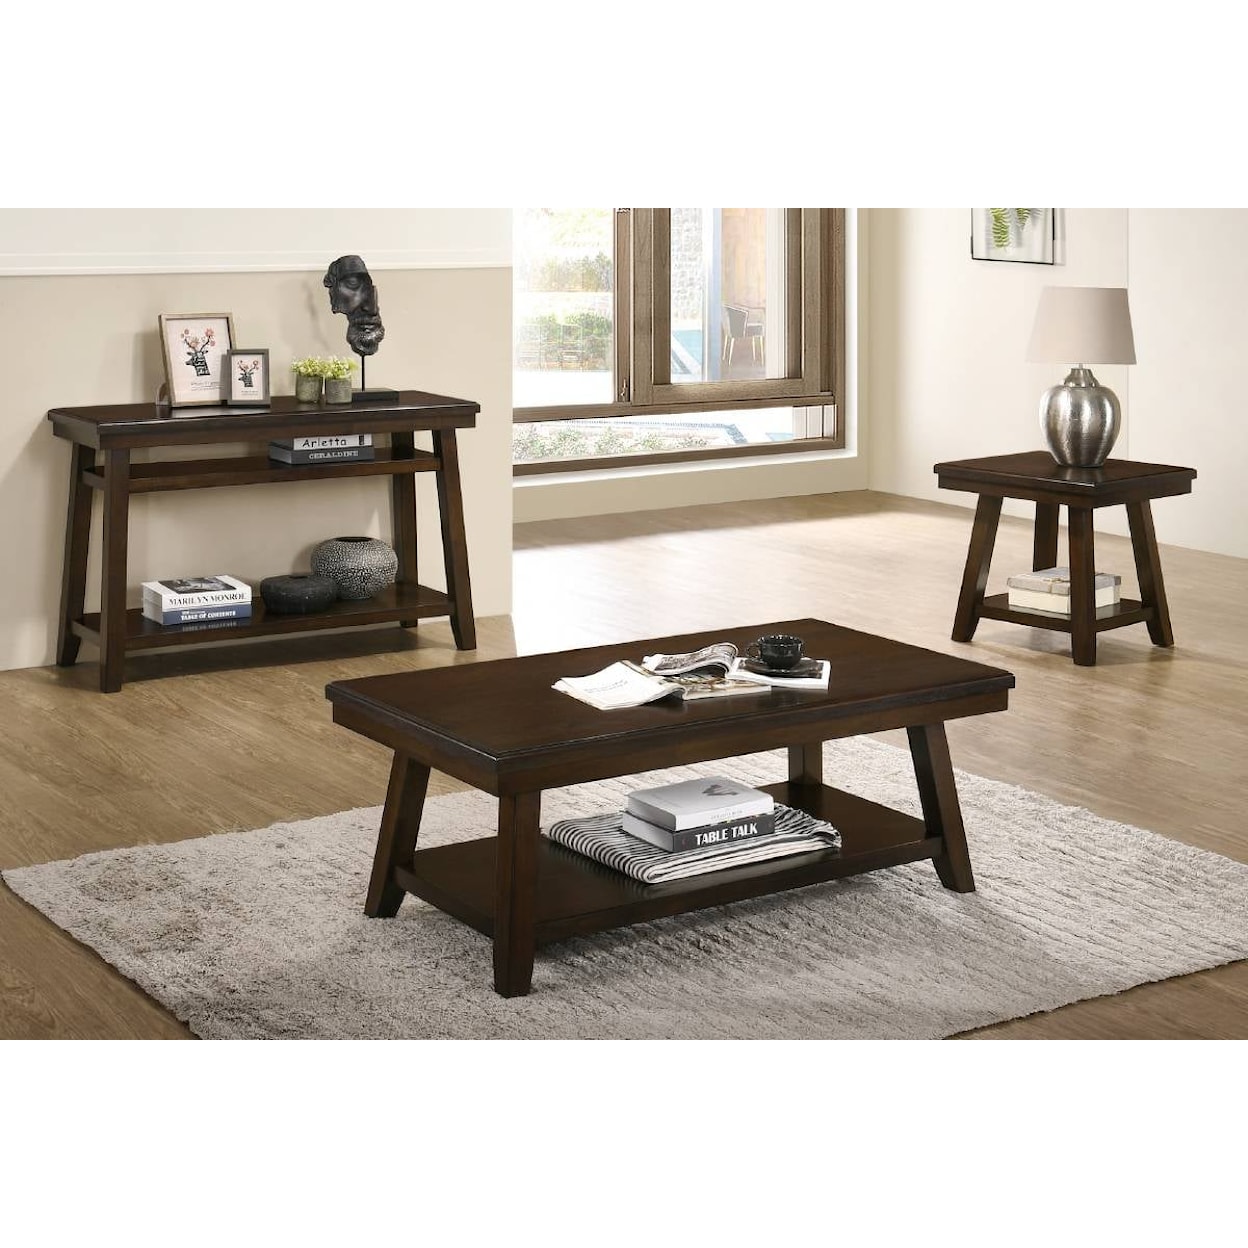 Poundex Occasional Tables HODGE BROWN END TABLE |